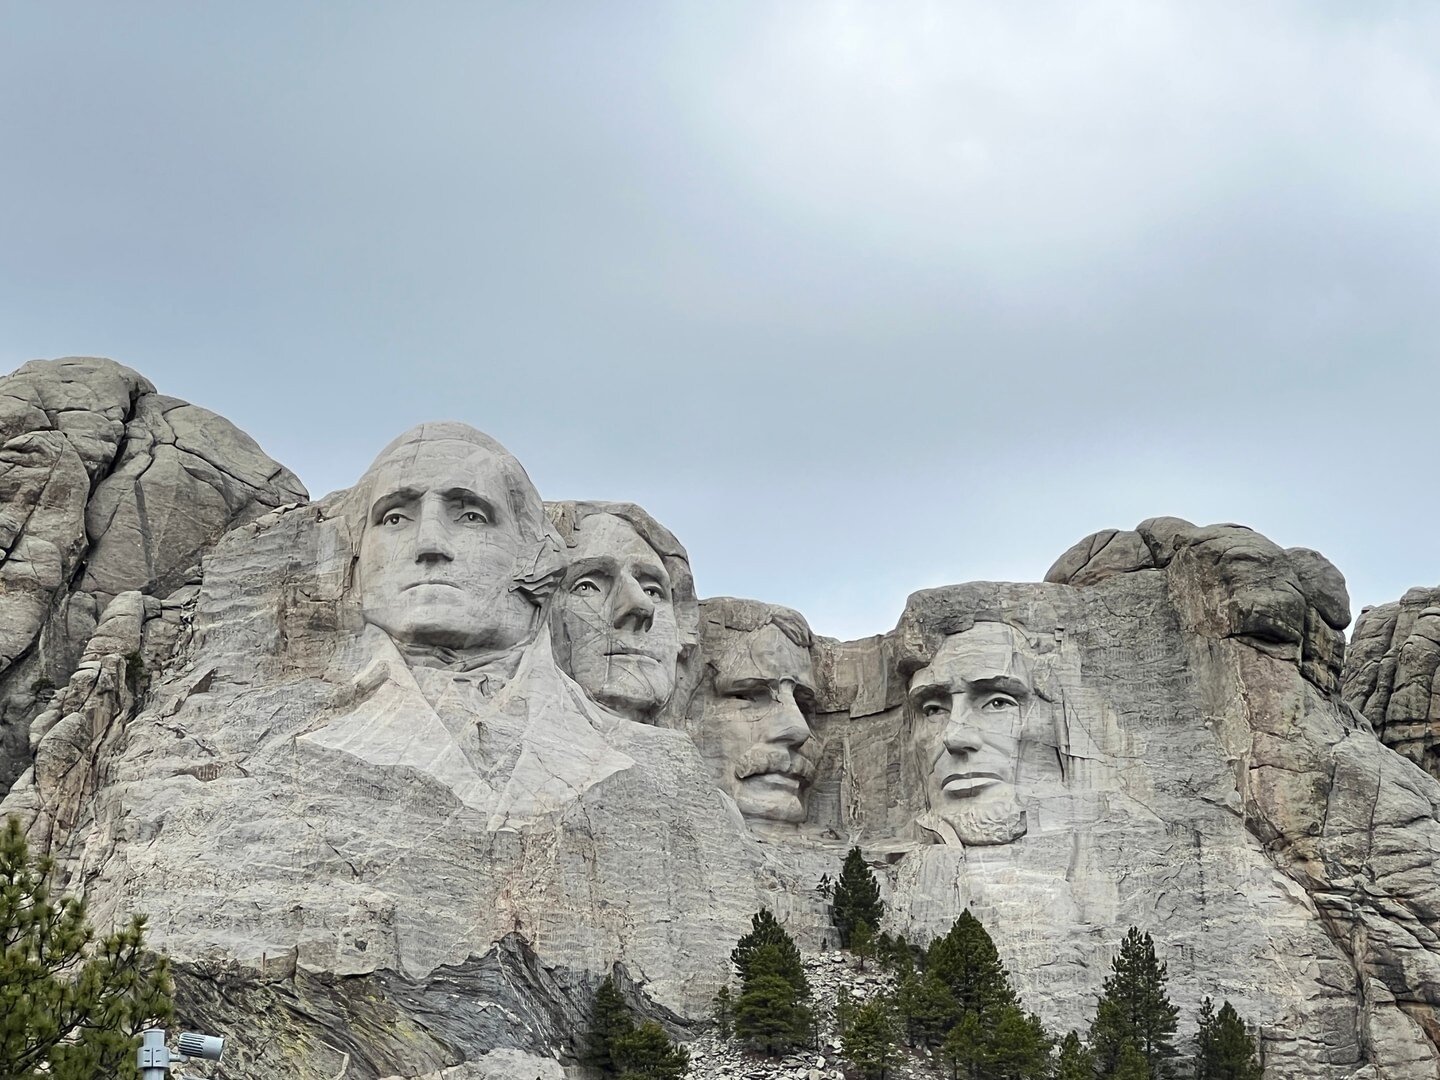 Mount Rushmore is one of those places that everyone should visit at least once in their lifetime 🙌🏼🇺🇸 From the stunning natural beauty of the surrounding Black Hills to the impressive presidential carvings themselves, it's a must-see destination.